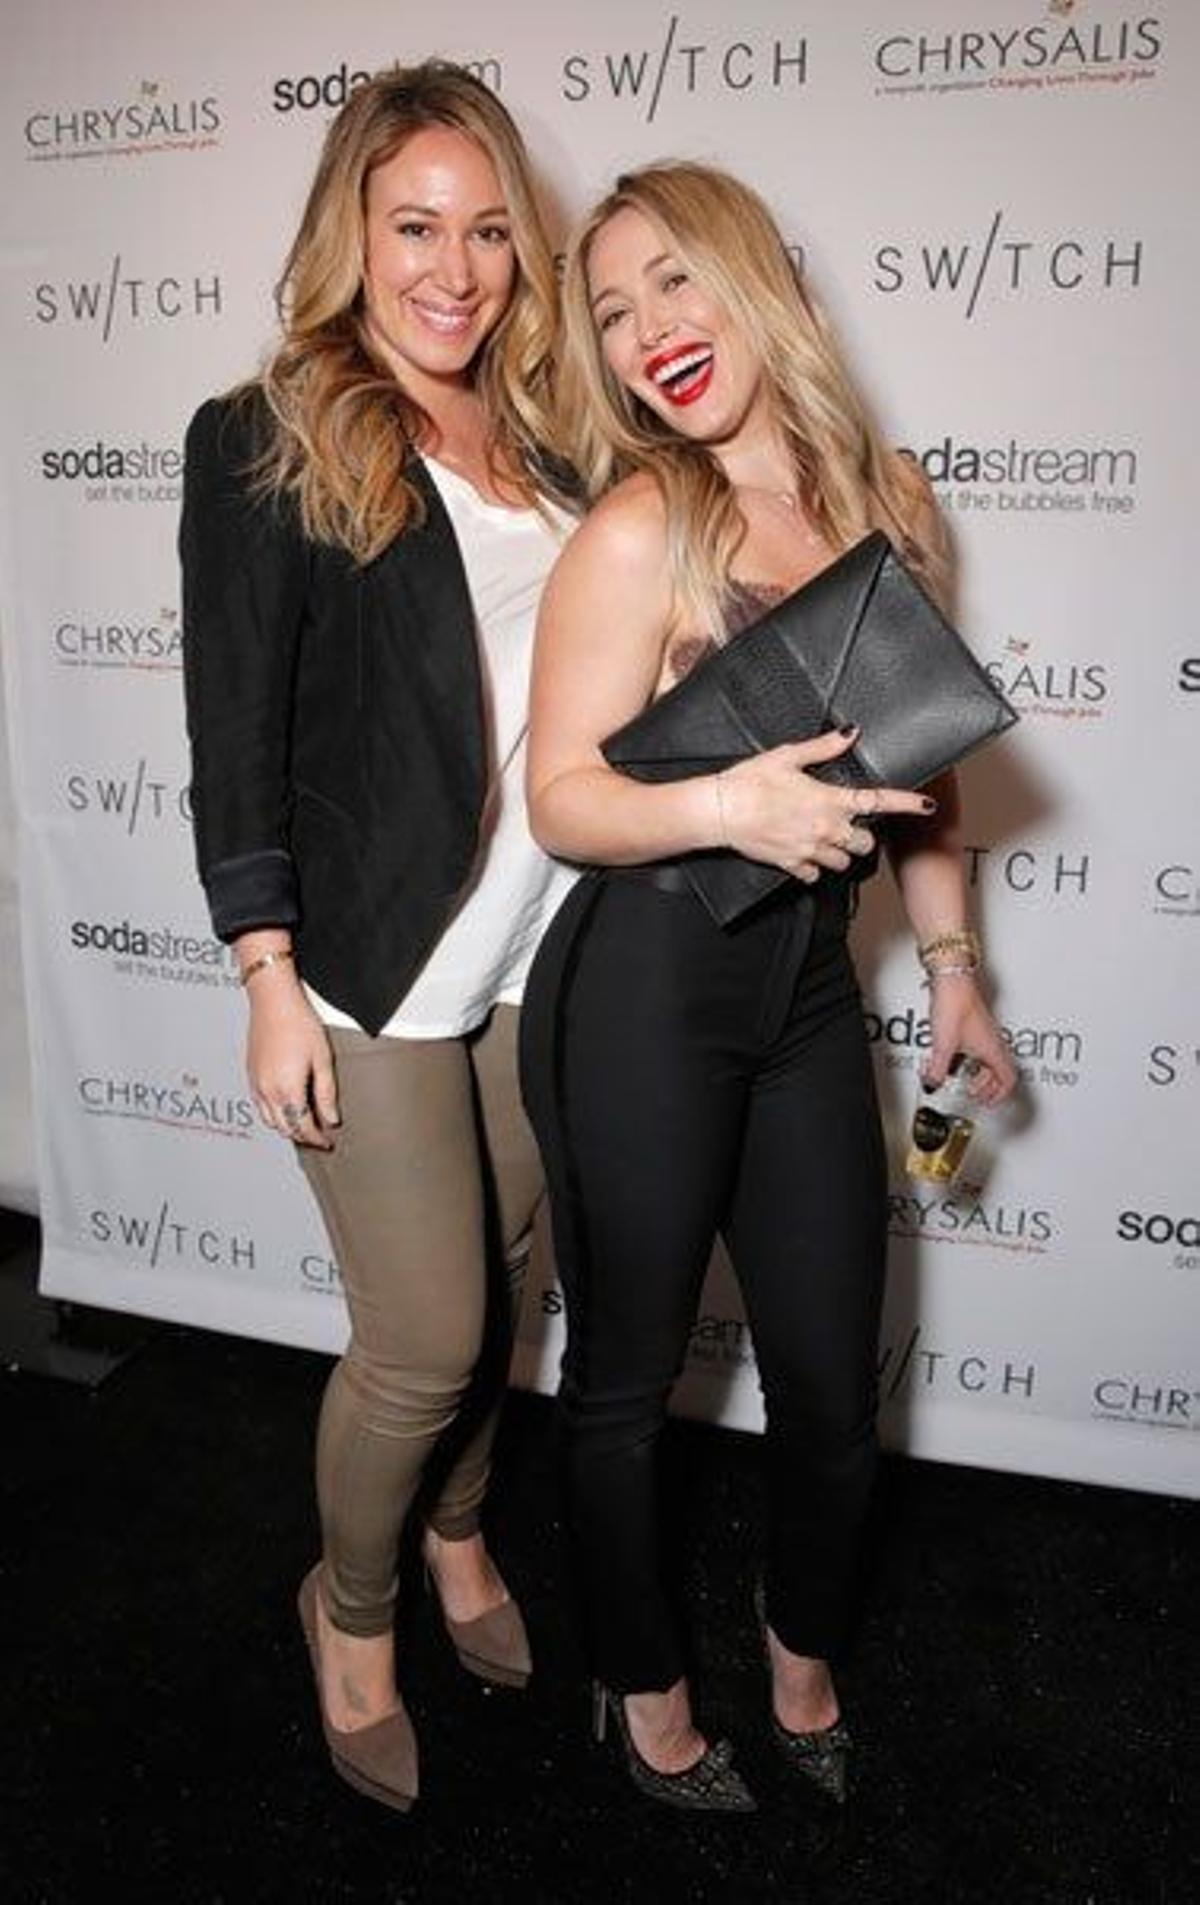 Hilary-Duff-and-sister-Haylie-Duff-